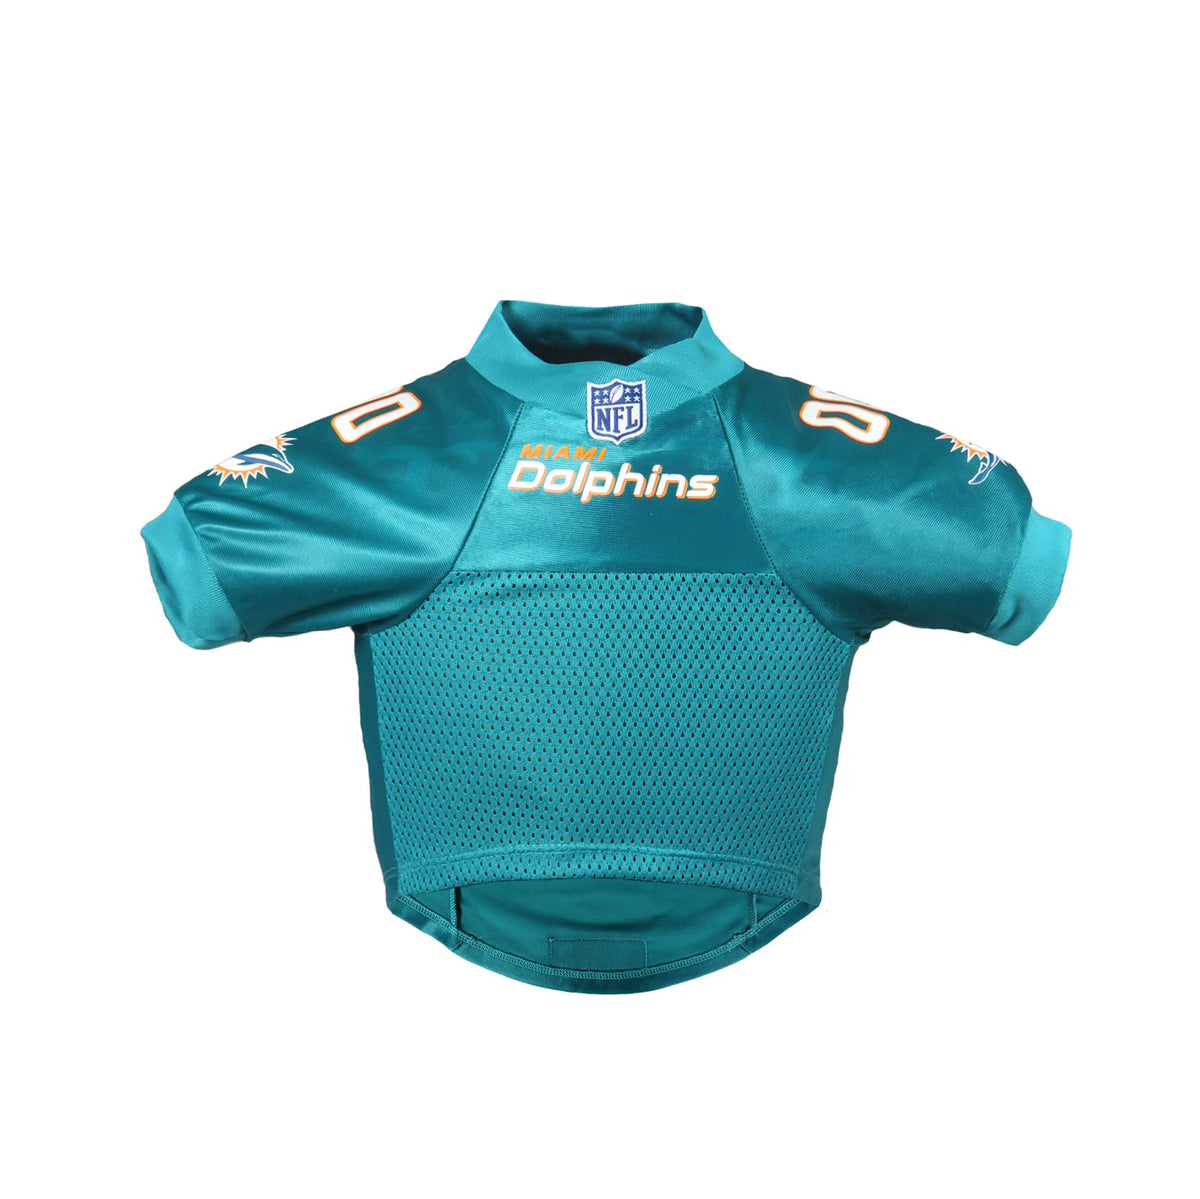 Miami Dolphins Premium Jersey - 3 Red Rovers